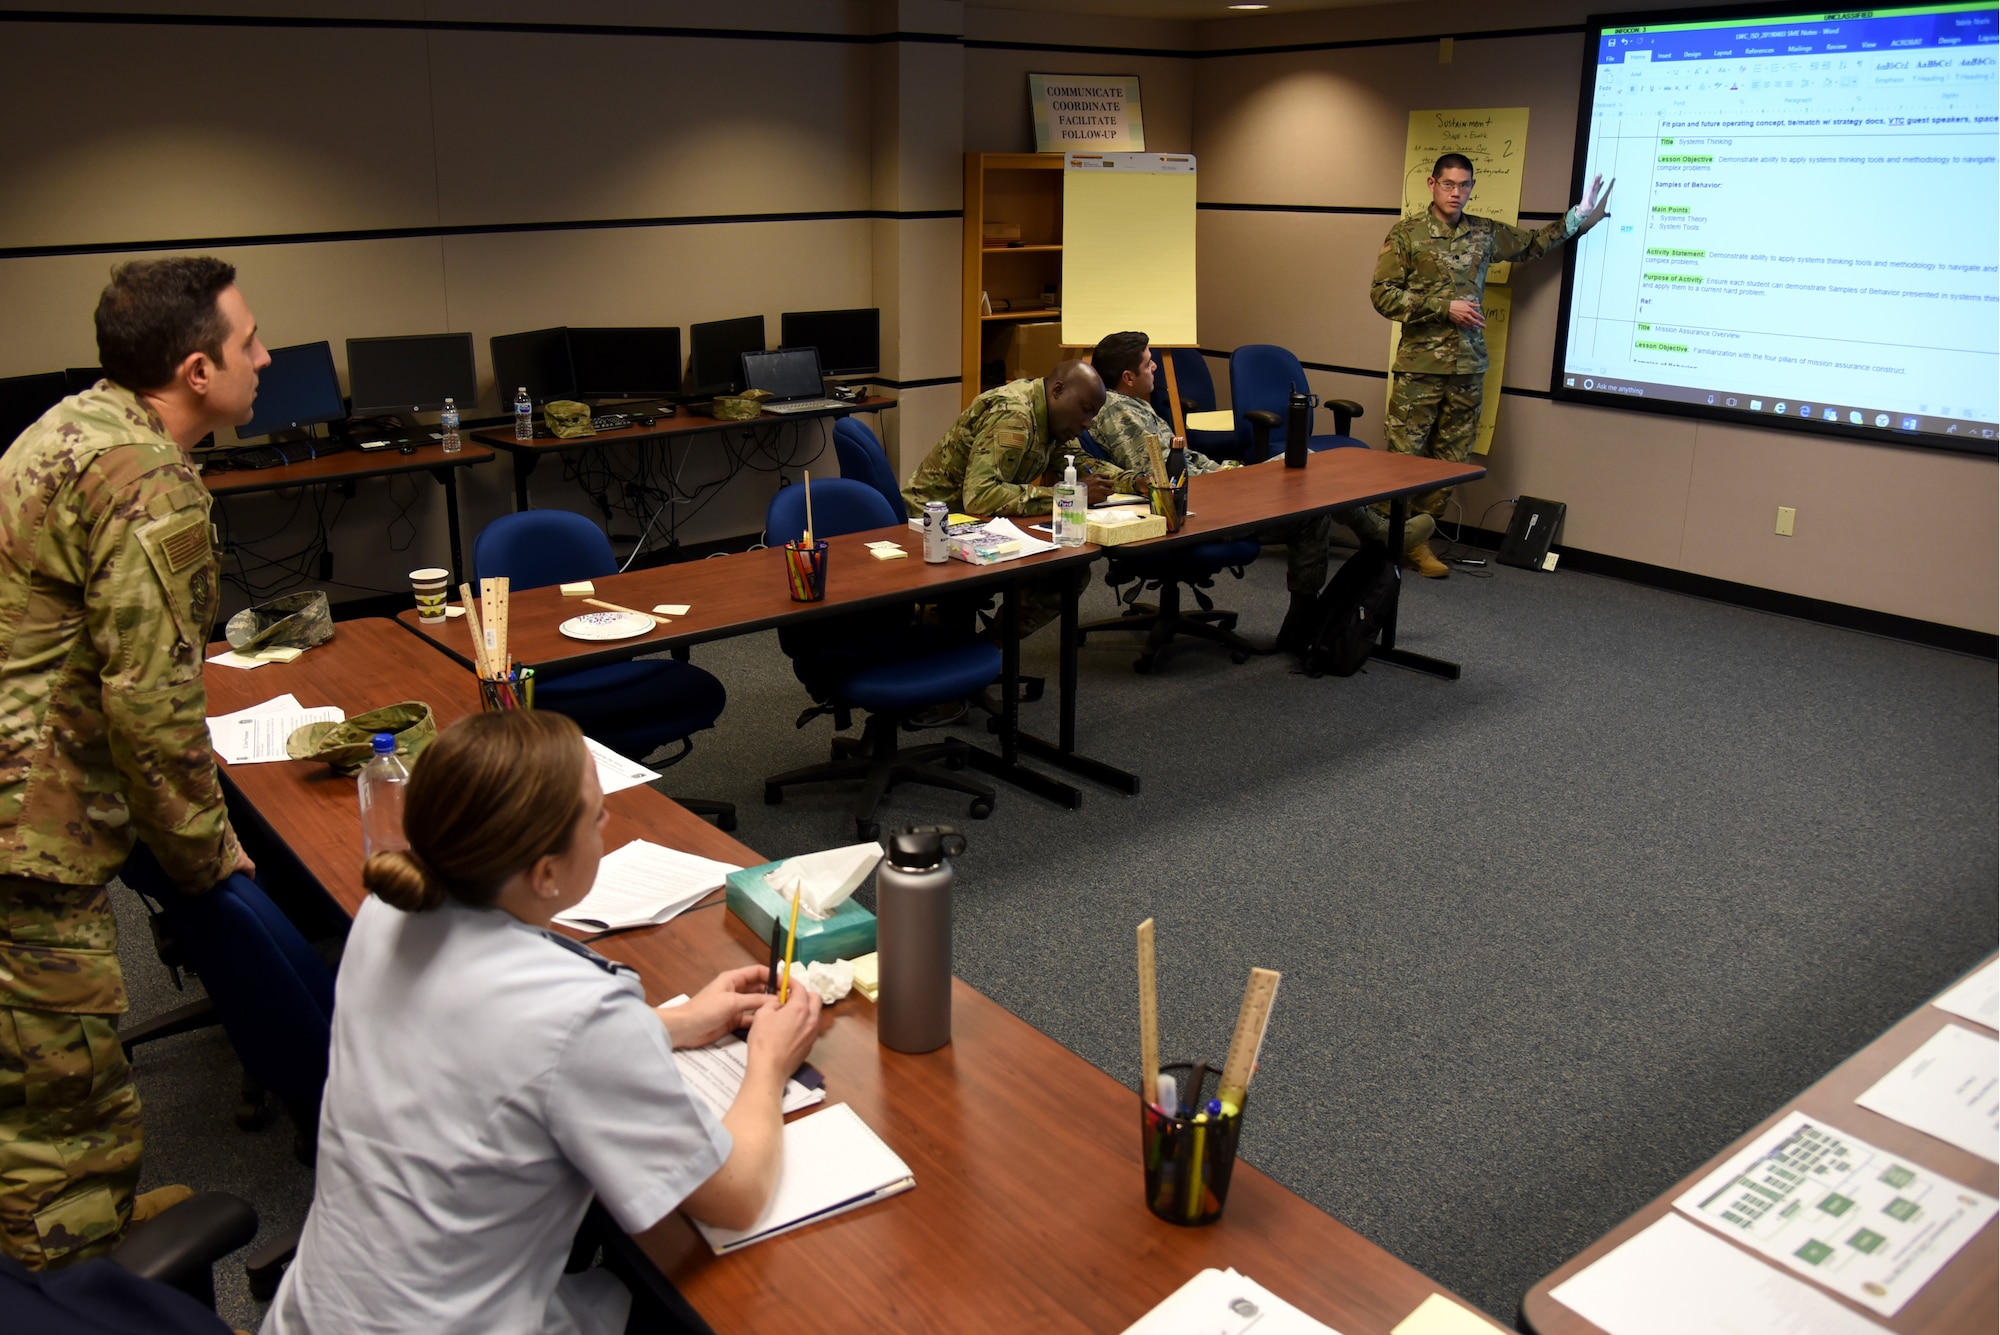 U.S. Air Force Lt. Col. Jason Okumura, chief of strategic communications assigned to the Joint Staff, briefs his team mates on lesson plan content at the U.S. Air Force Expeditionary Operations School (EOS), part of the U.S. Air Force Expeditionary Center, at Joint Base McGuire-Dix-Lakehurst, New Jersey, April 4, 2019.